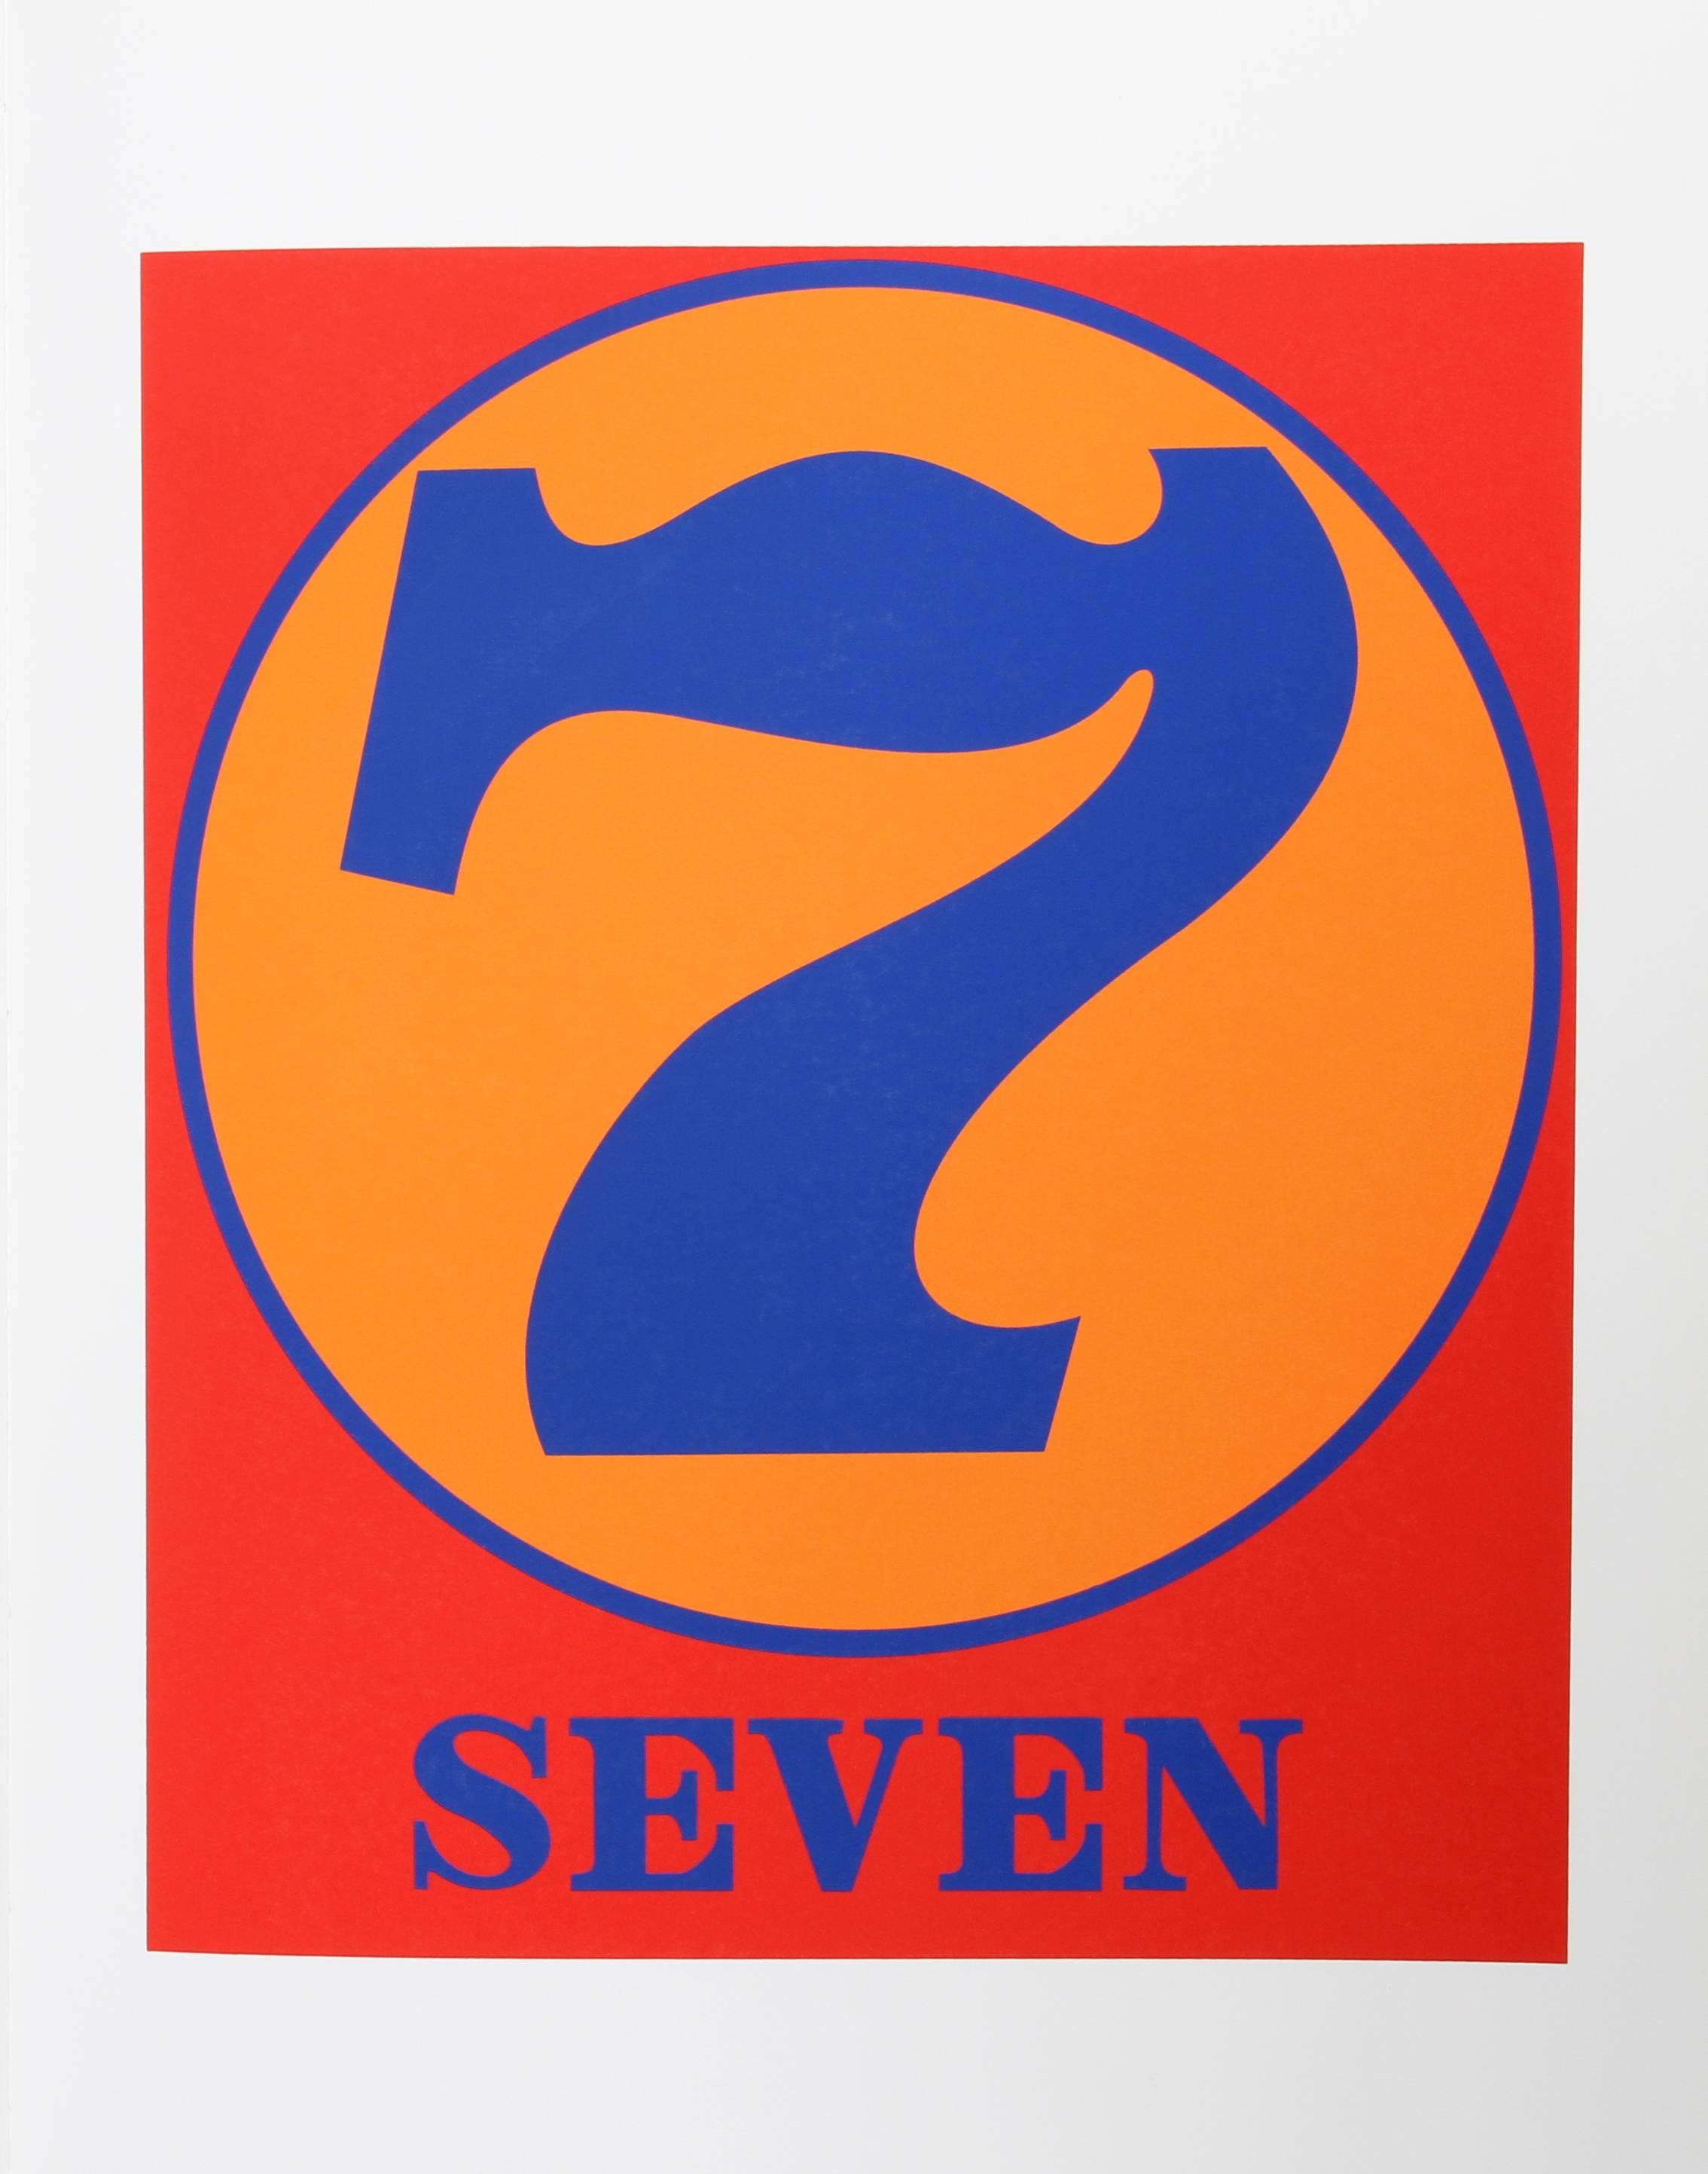 Artist: Robert Indiana, American (1928 - 2018)
Title: Number 7 from the American Dream Portfolio
Year: 1968 (1997)
Medium: Screenprint on Wove Paper
Edition Size: 395
Image Size: 16.75 x 14 inches
Size: 22 in. x 17 in. (55.88 cm x 43.18 cm)

Printed